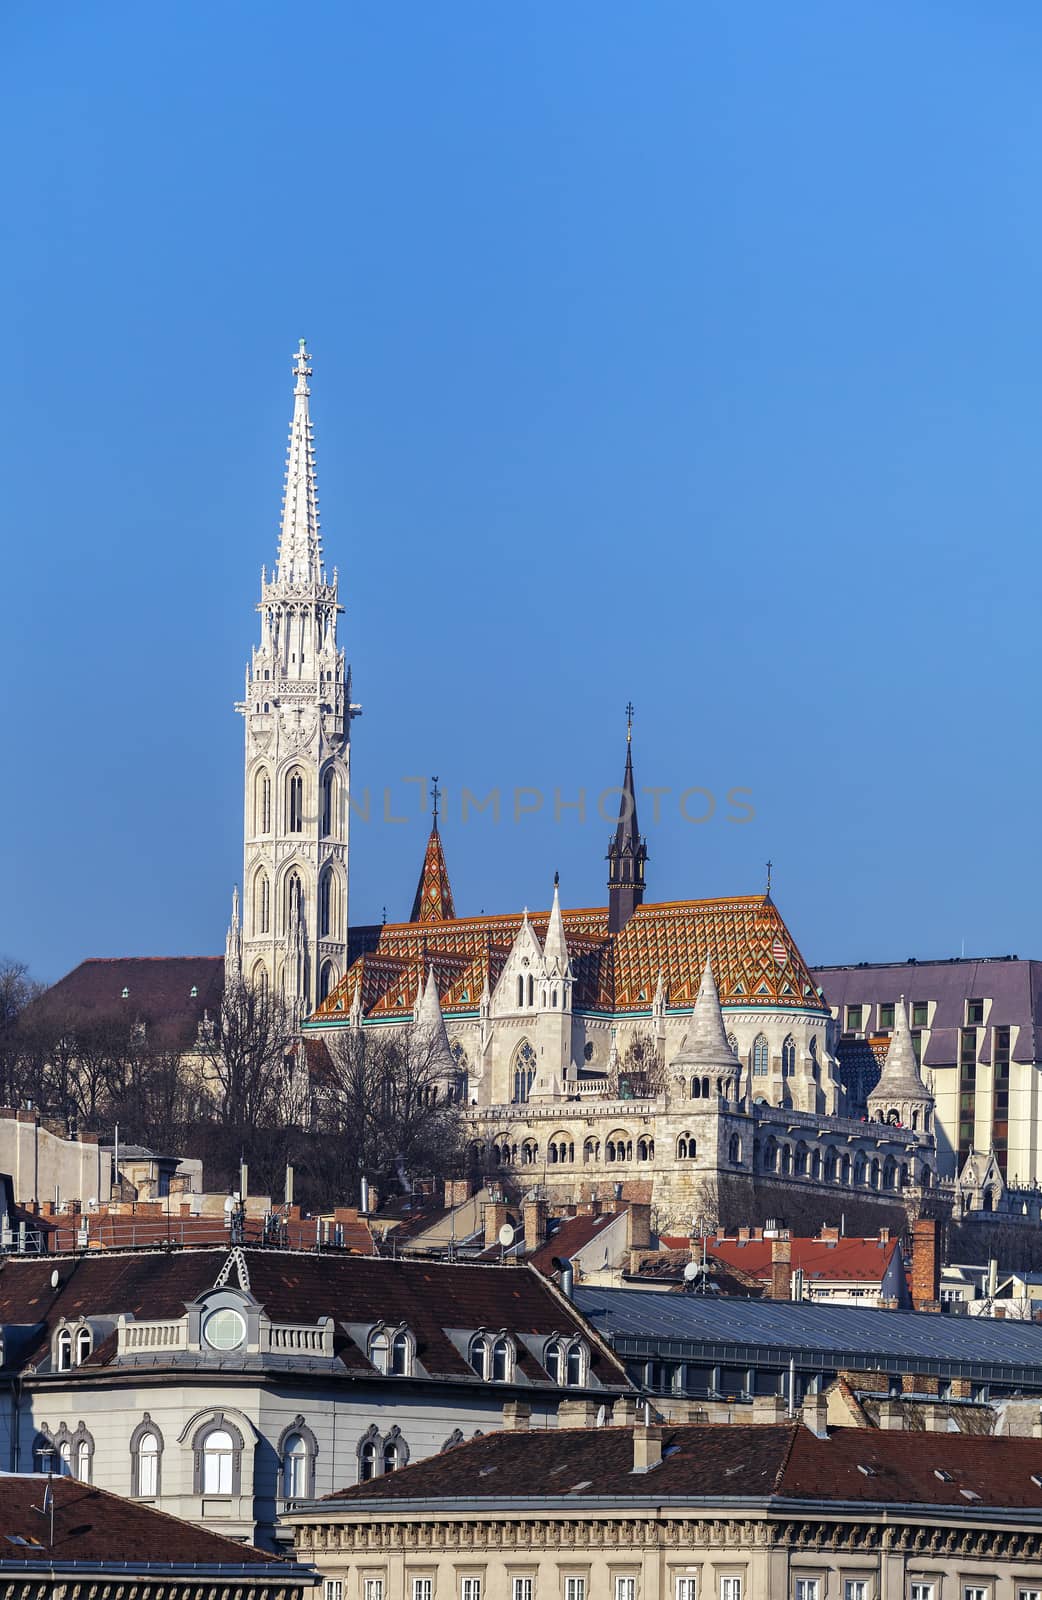 View of Matthias Church and Fisherman's Bastion in Budapest Hungary by Goodday